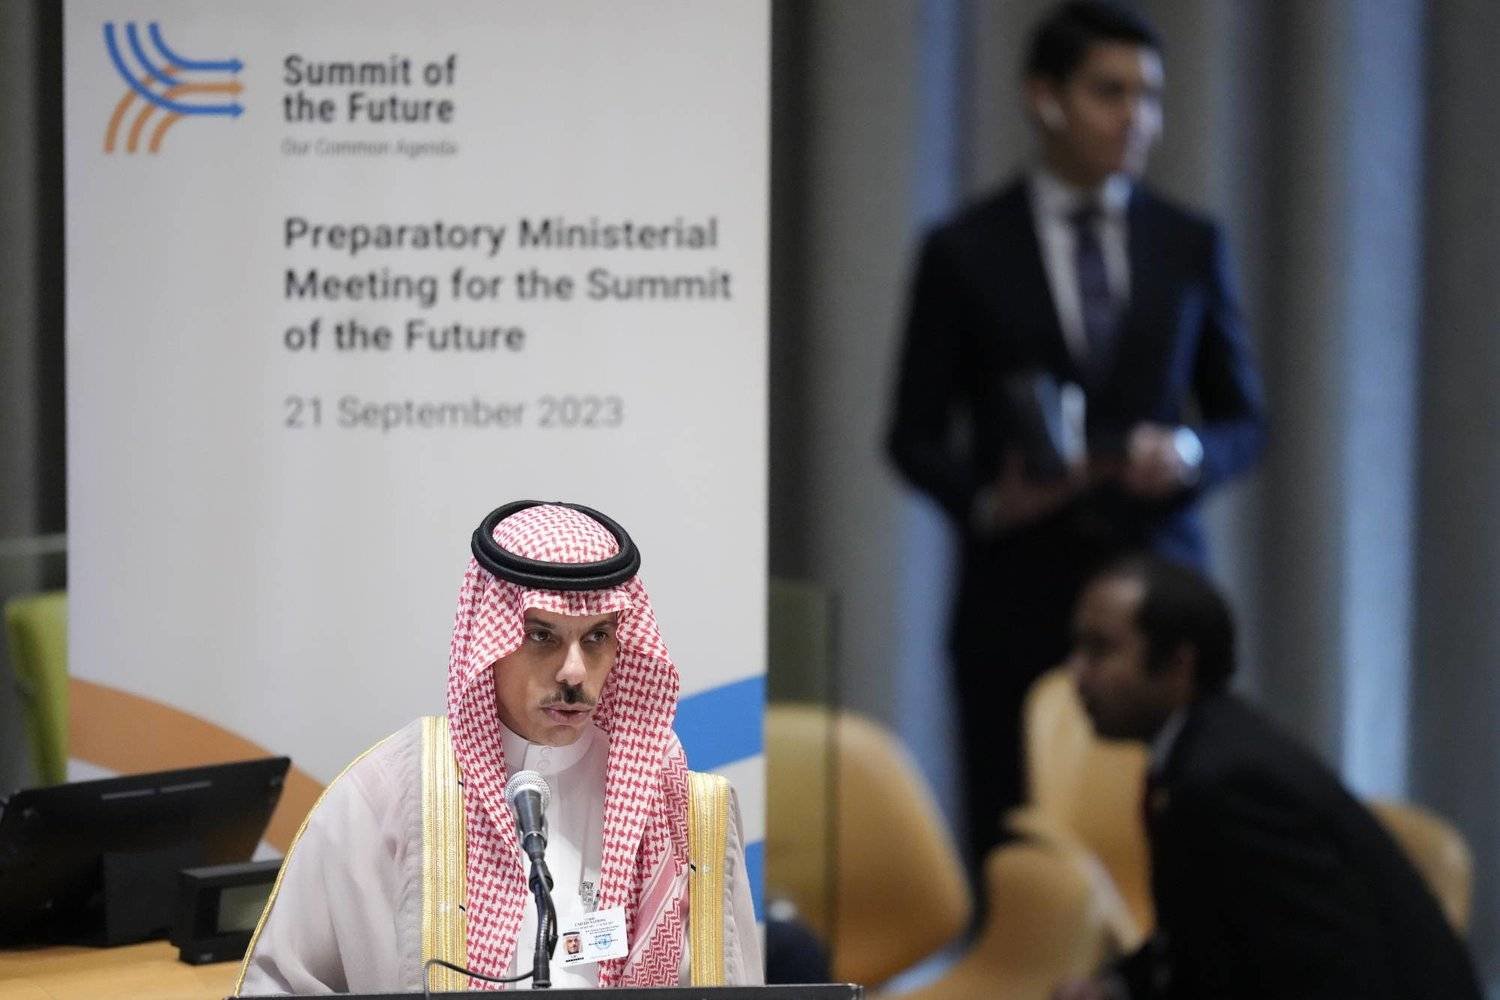 Saudi Foreign Minister Prince Faisal bin Farhan bin Abdullah speaks at a ministerial meeting to prepare for the Summit of the Future in September 2024 in New York on Thursday. (SPA)